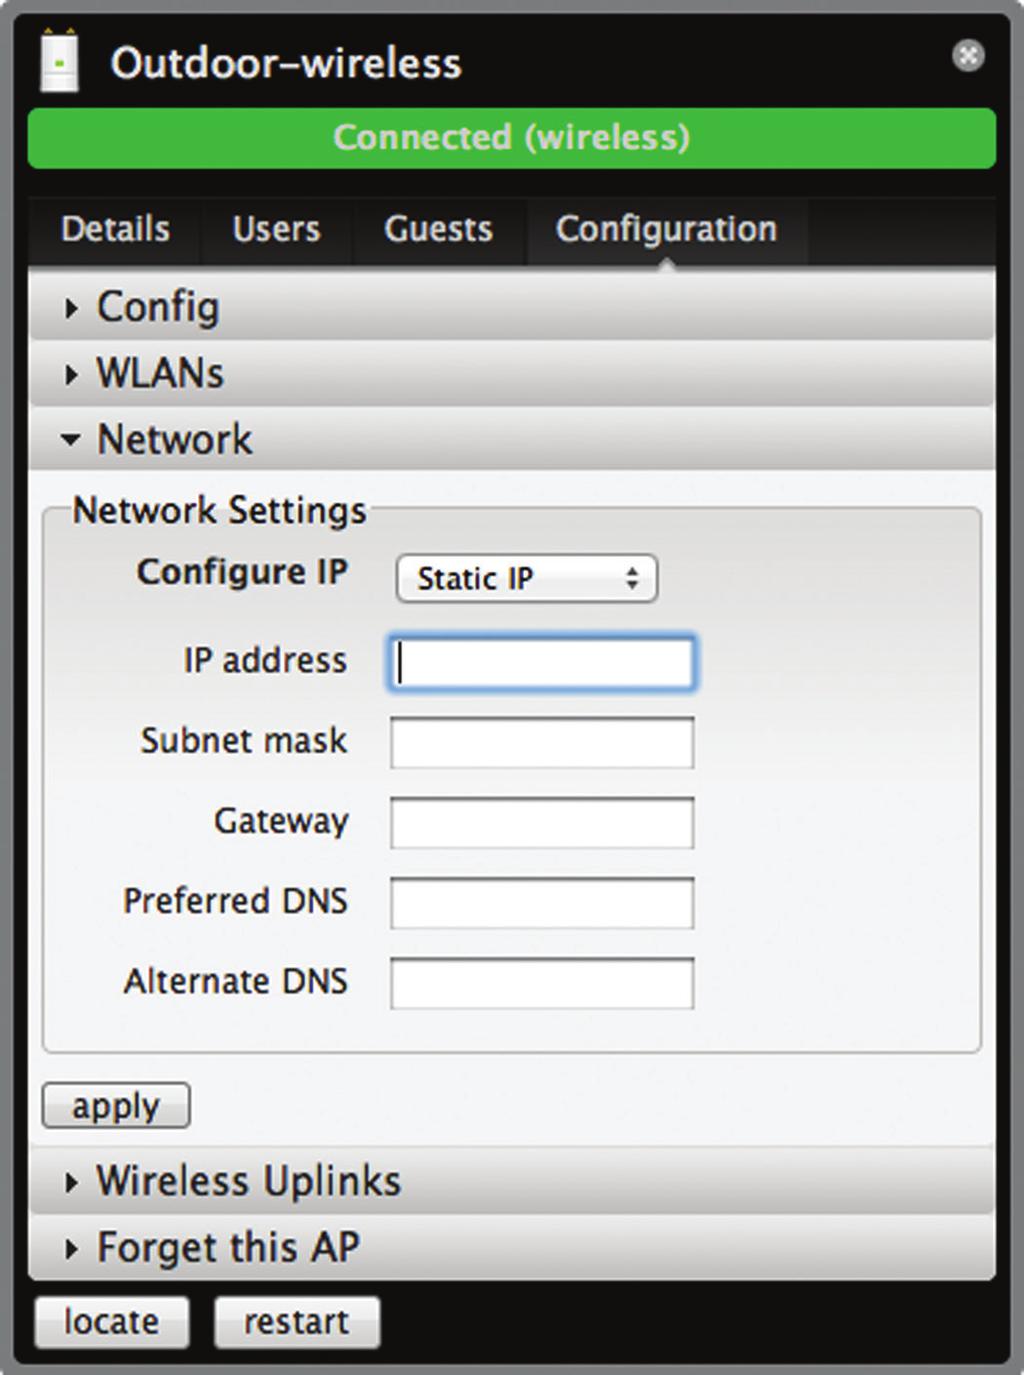 Static IP Choose this option to assign the static IP address, Subnet mask, Gateway, Preferred DNS, and Alternate DNS for the Access Point. -- IP address Enter the IP address for the Access Point.